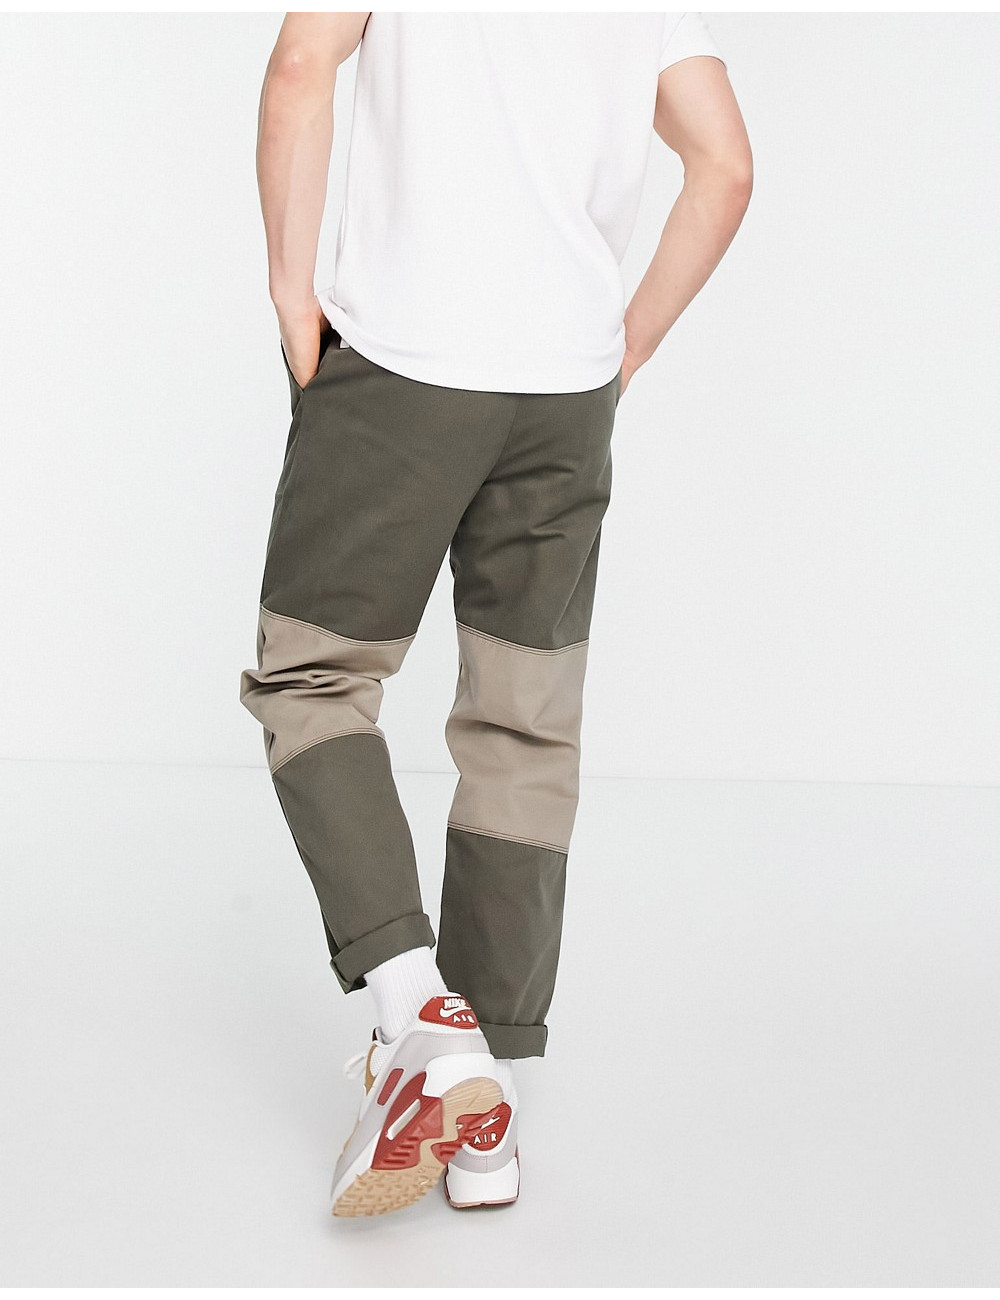 Topman cut and sew relaxed...